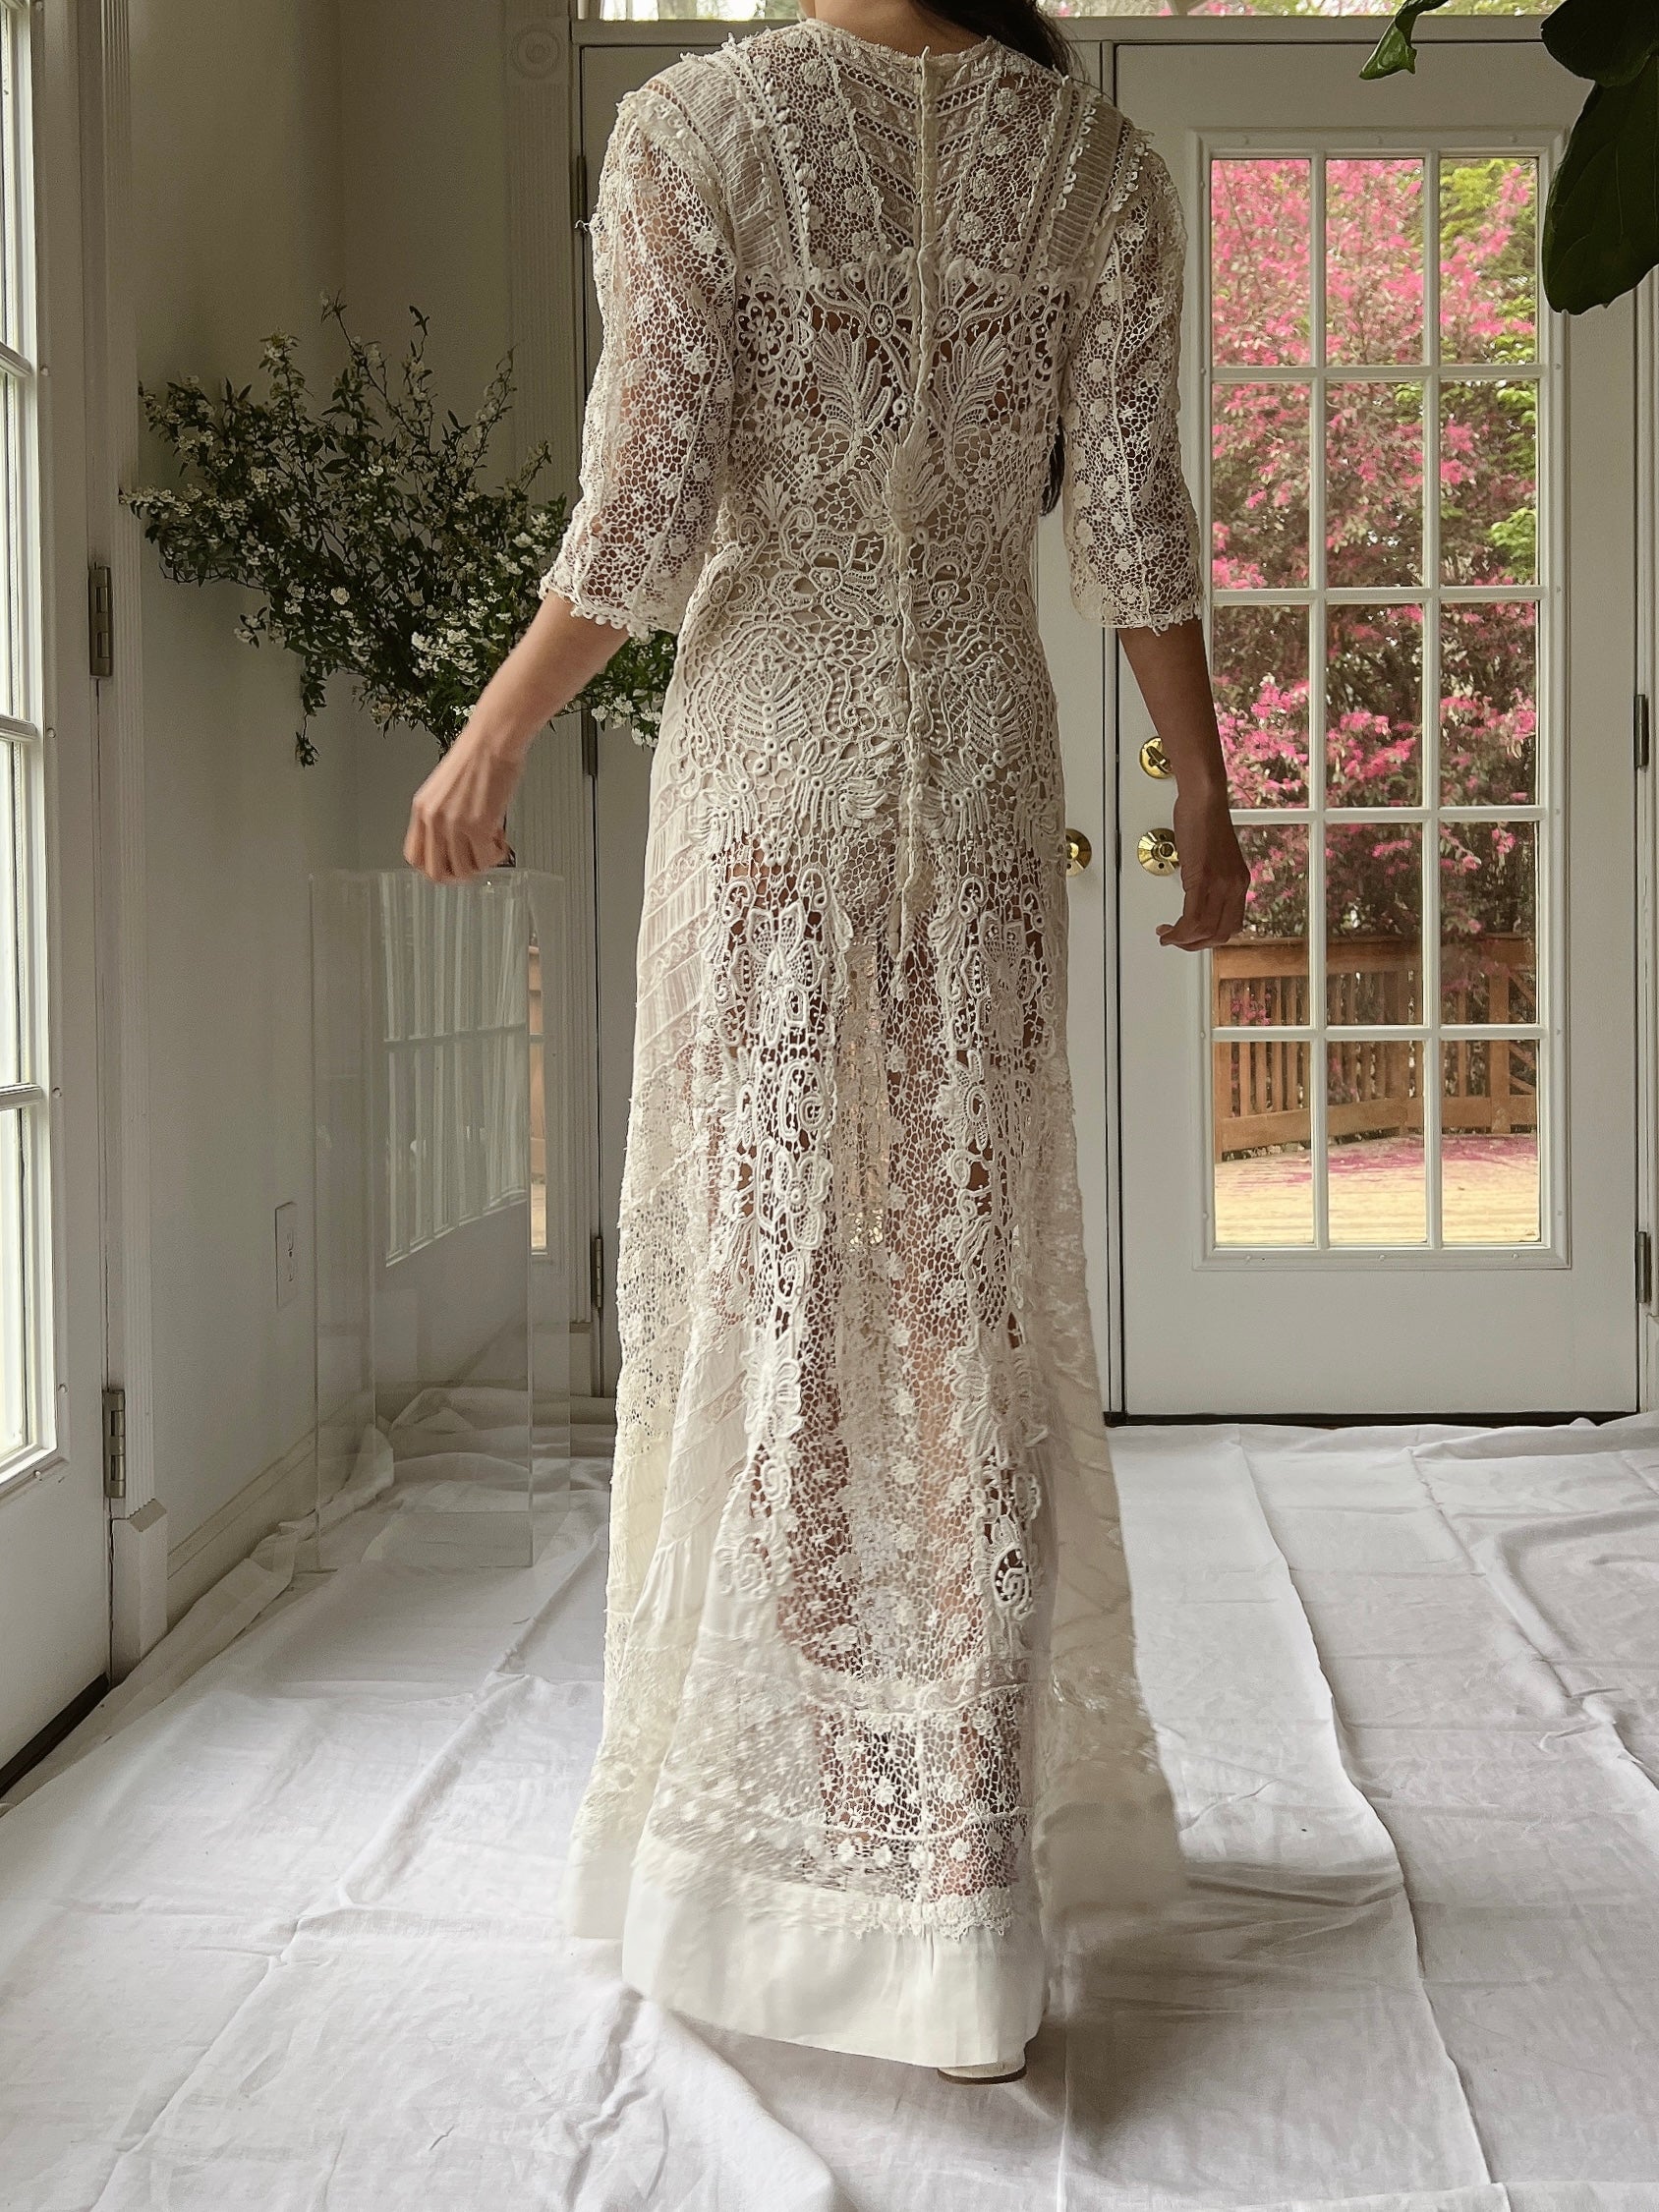 Antique Crochet Embroidered Dress - XS/S